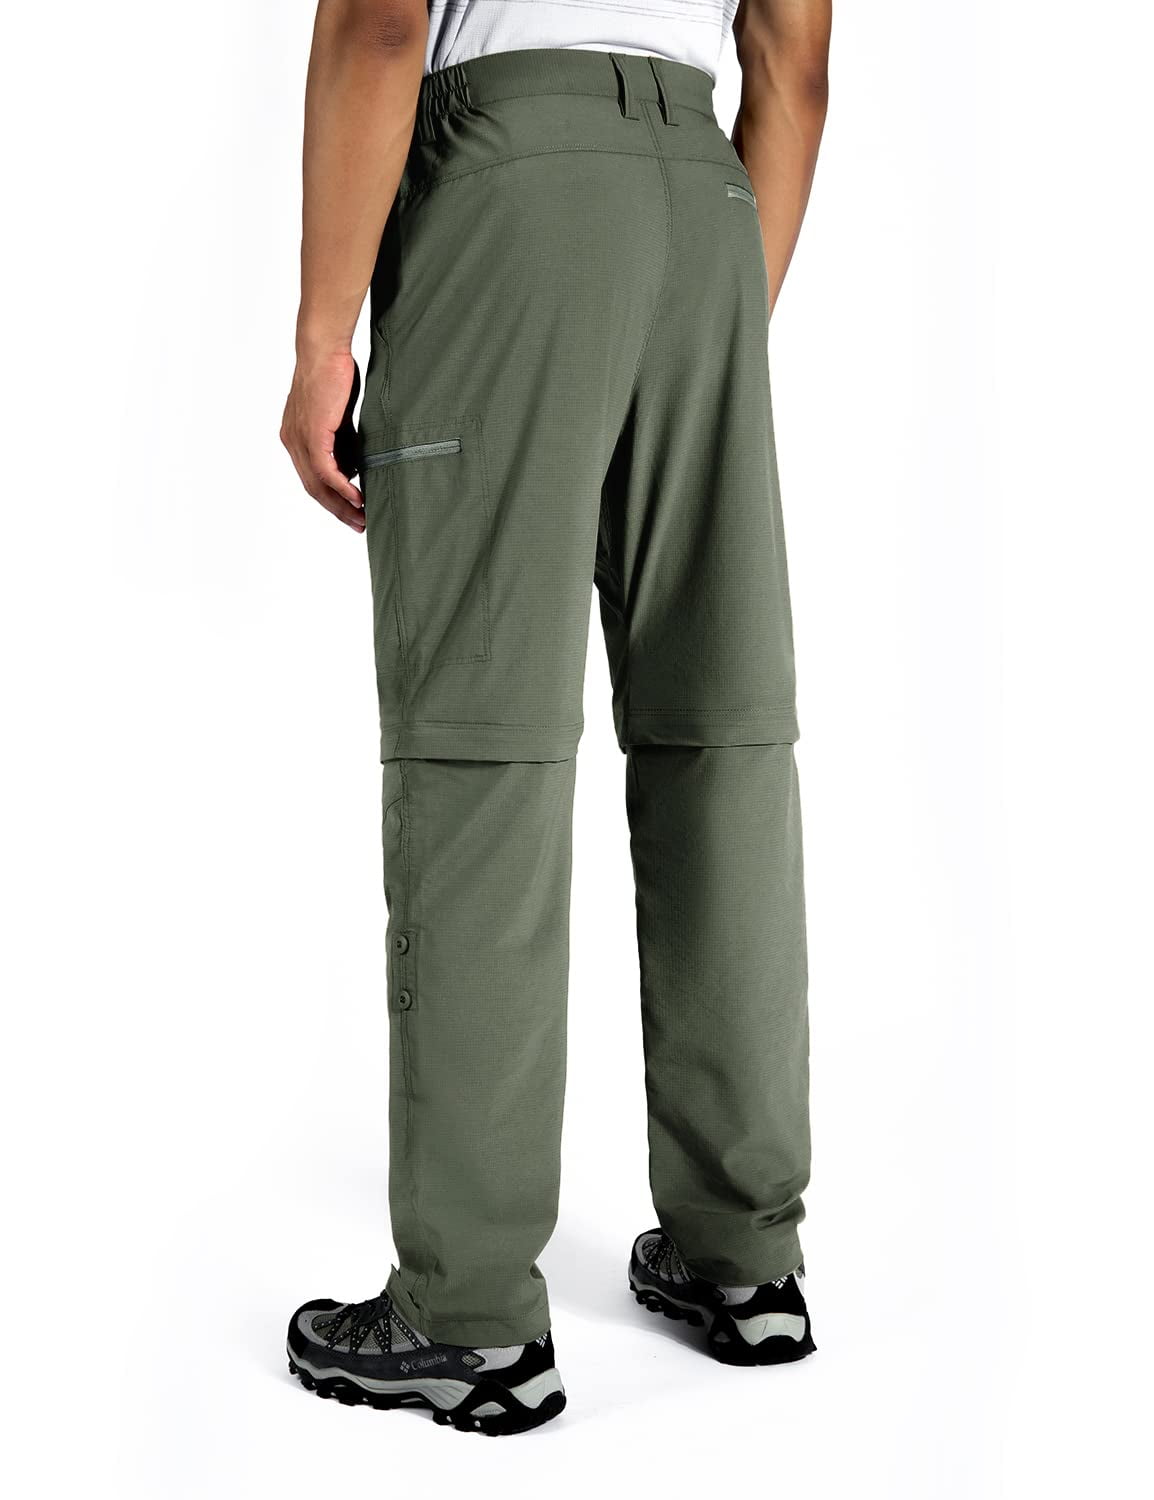 Hiauspor Mens Outdoor Convertible Hiking Pants Quick Dry Casual Trousers  Zip Off Pants Sizes S-3XL 